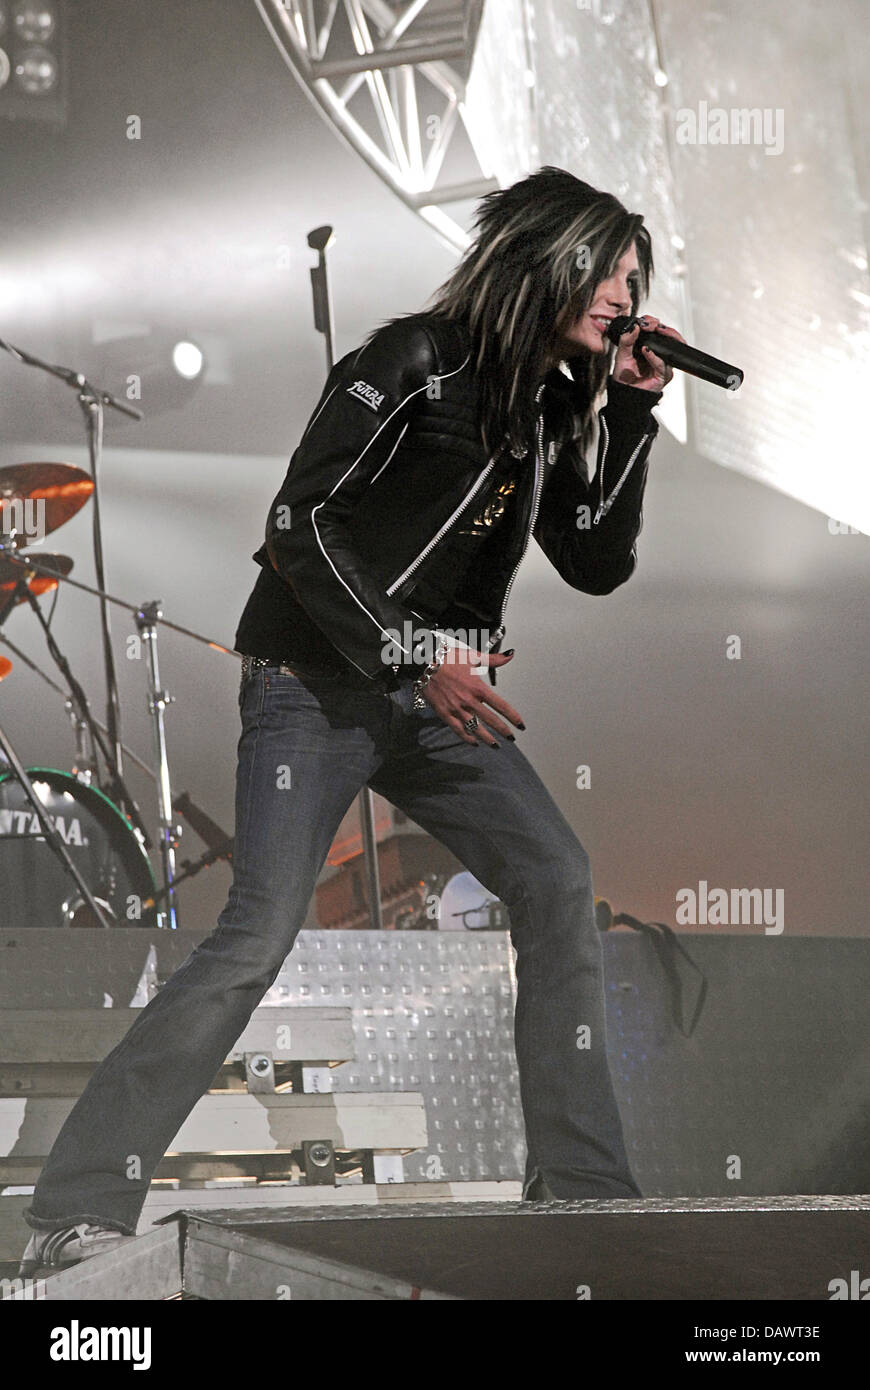 Singer Bill Kaulitz pictured during a show of his band Tokio Hotel in Hamburg, Germany, 01 May 2007. Photo: Jens Schierenbeck Stock Photo